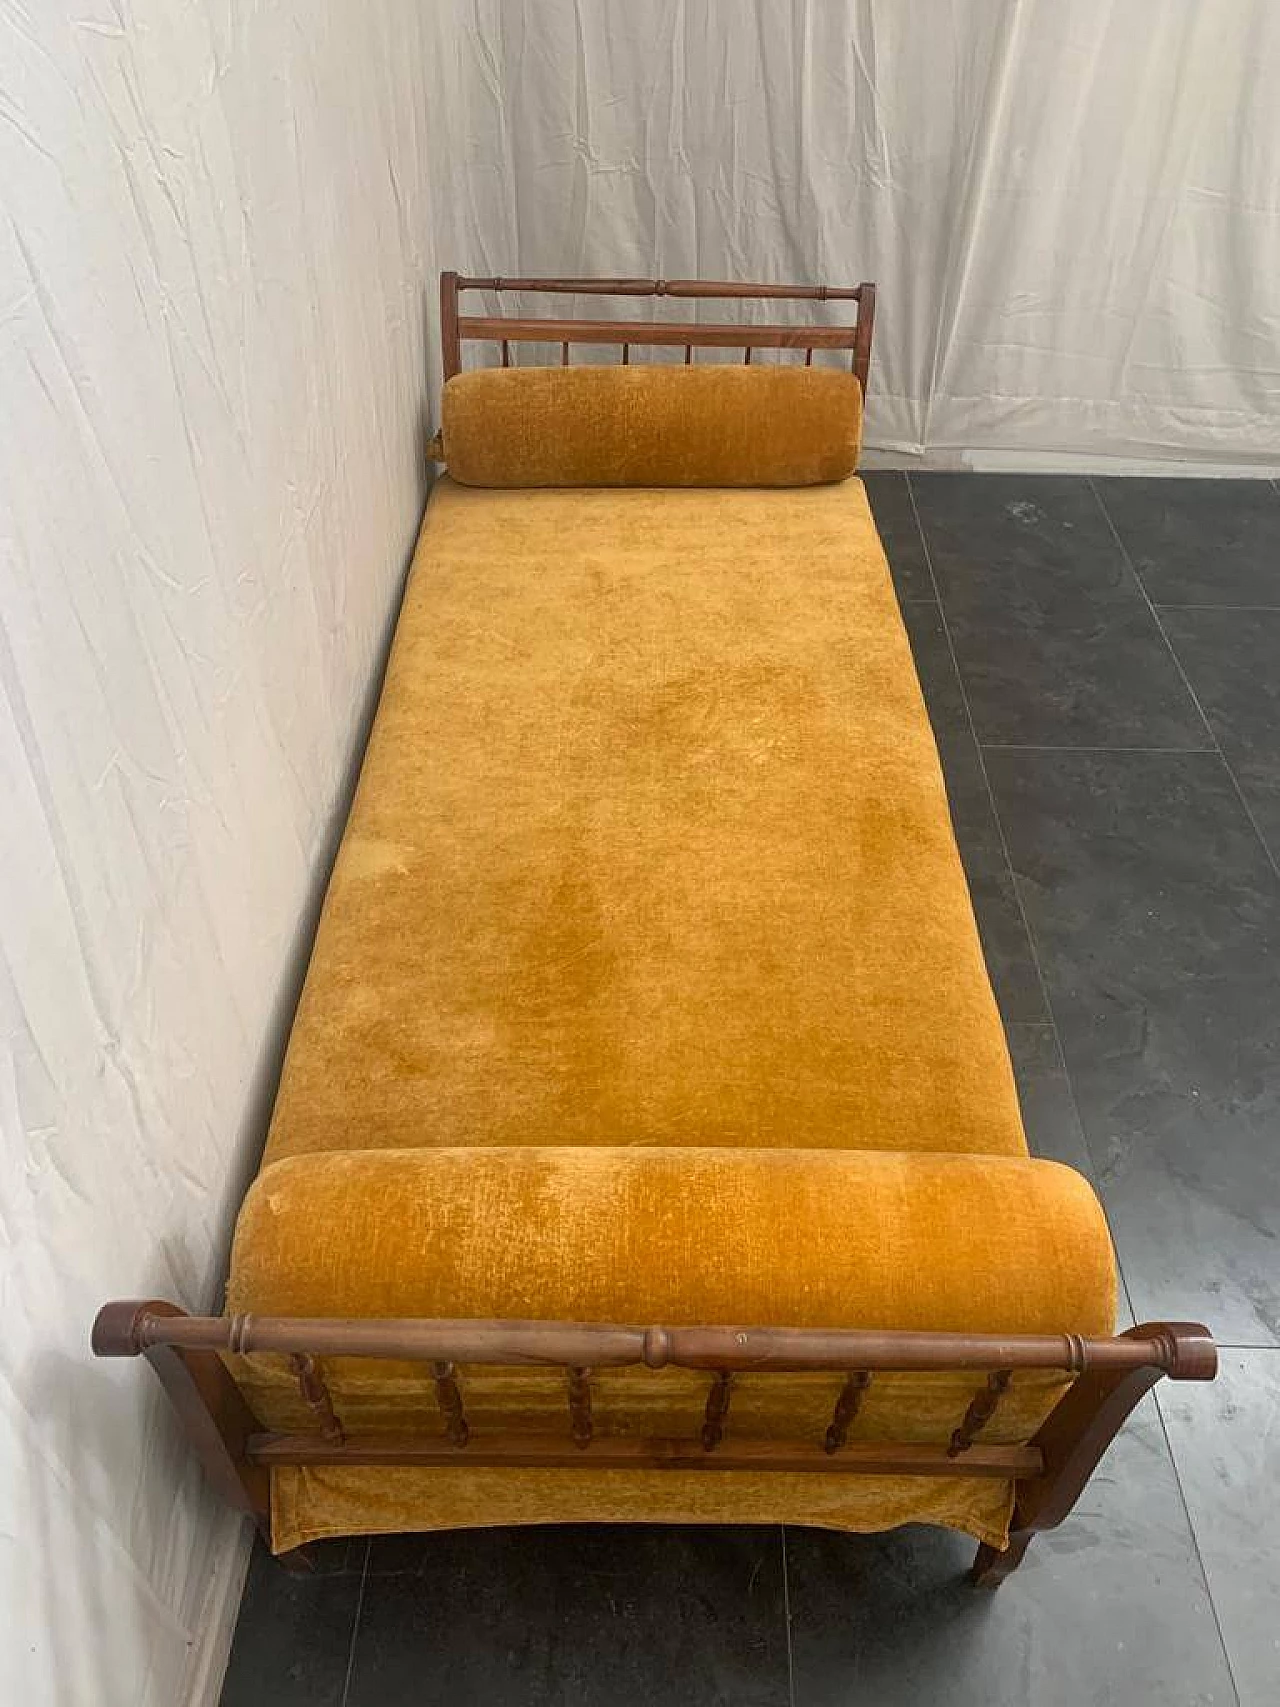 Cherry daybed wood sofa with yellow cover, early 20th century 1116260